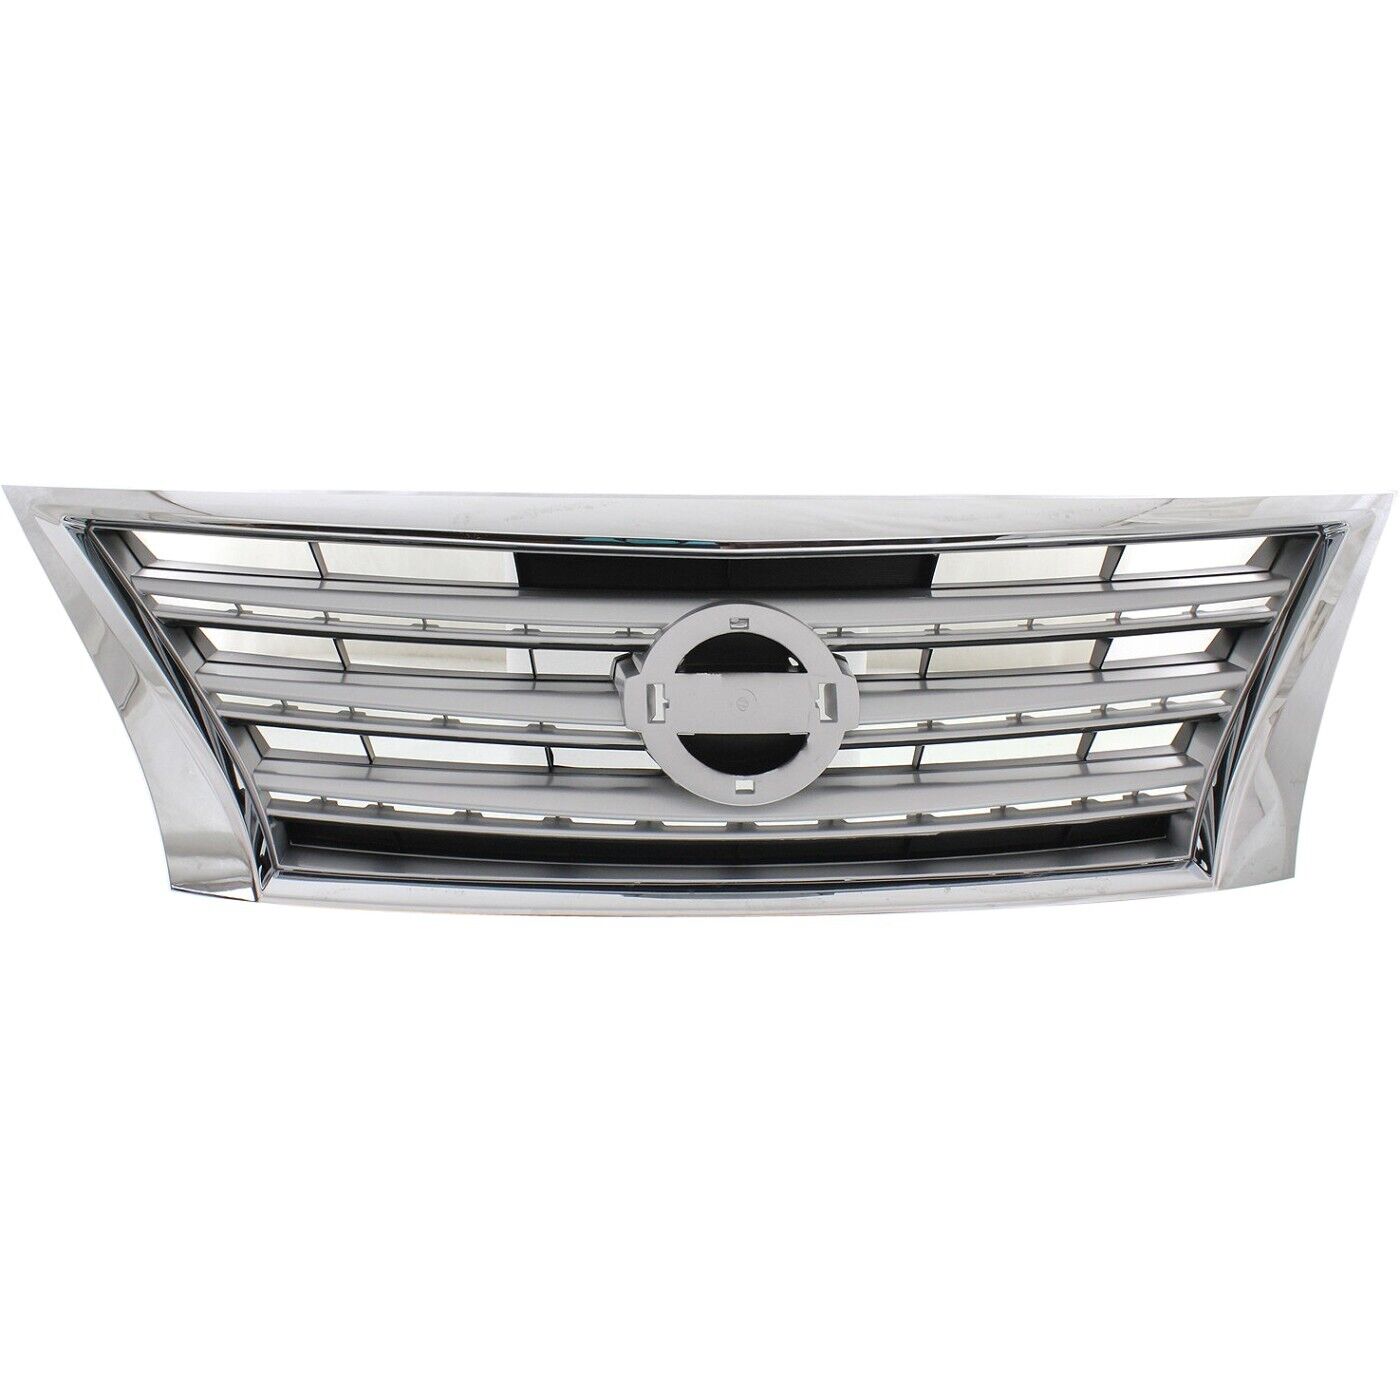 Grille For 2013-2015 Nissan Sentra Chrome Shell w/ Silver Insert Plastic